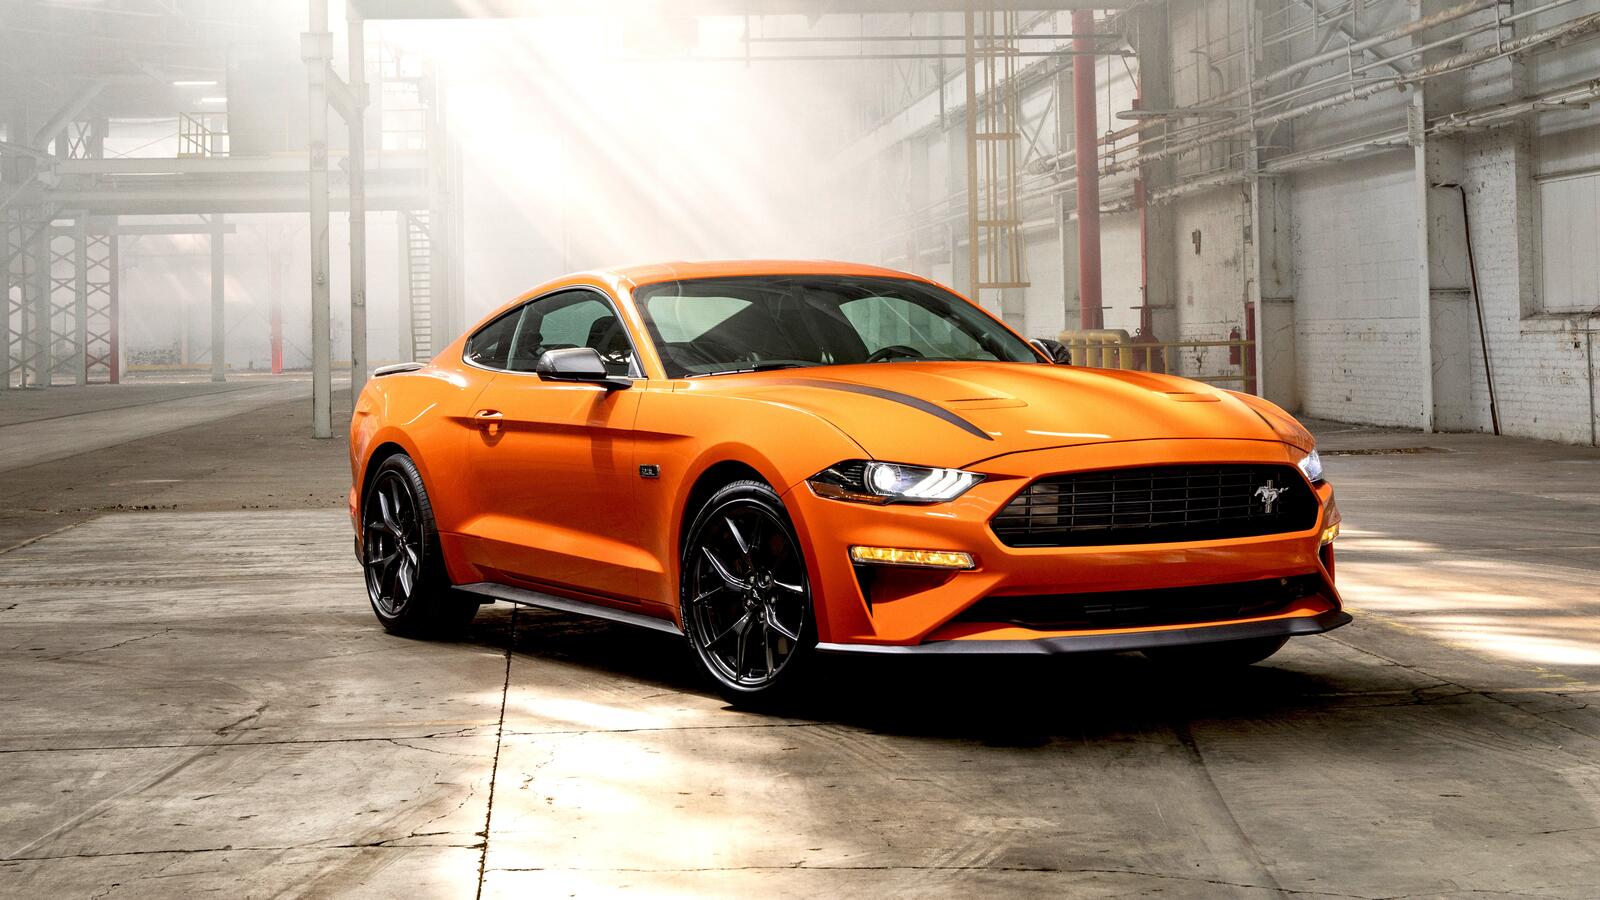 Wallpapers orange Ford Mustang muscle cars on the desktop